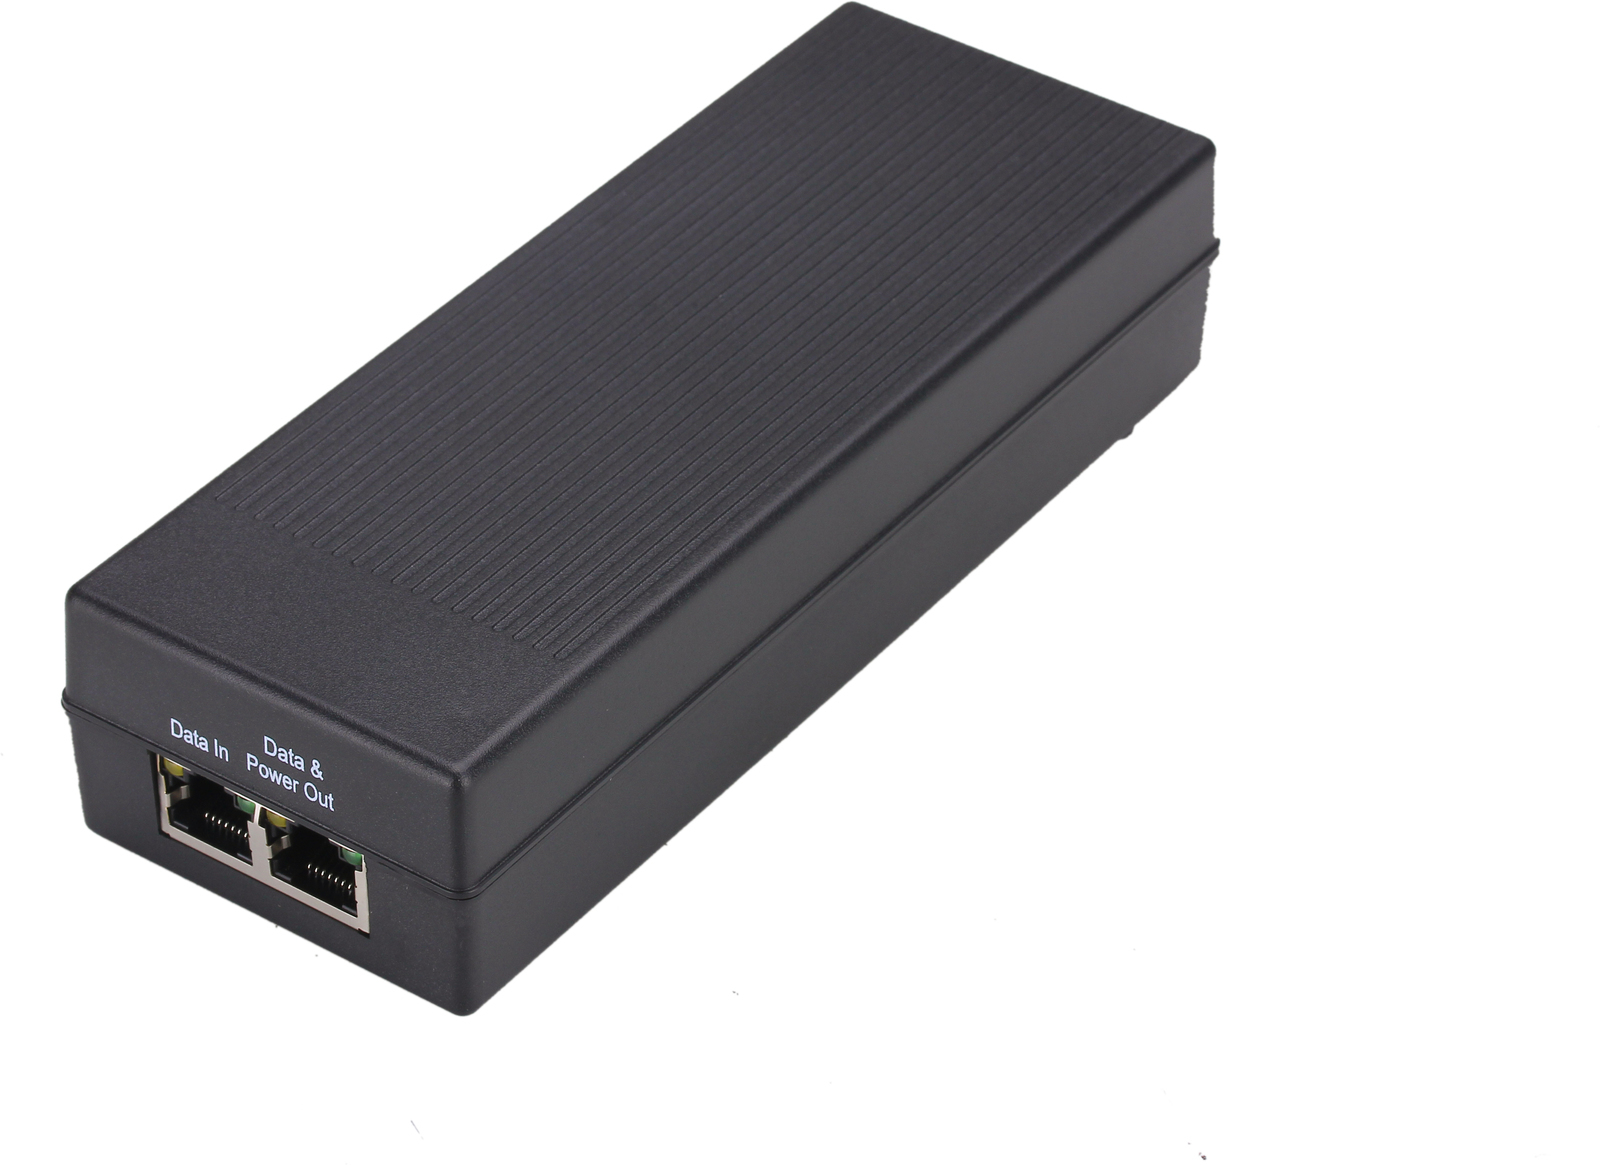 POEINJ-30W-UK MICROCONNECT 30W 802.3af/at PoE Injector UK